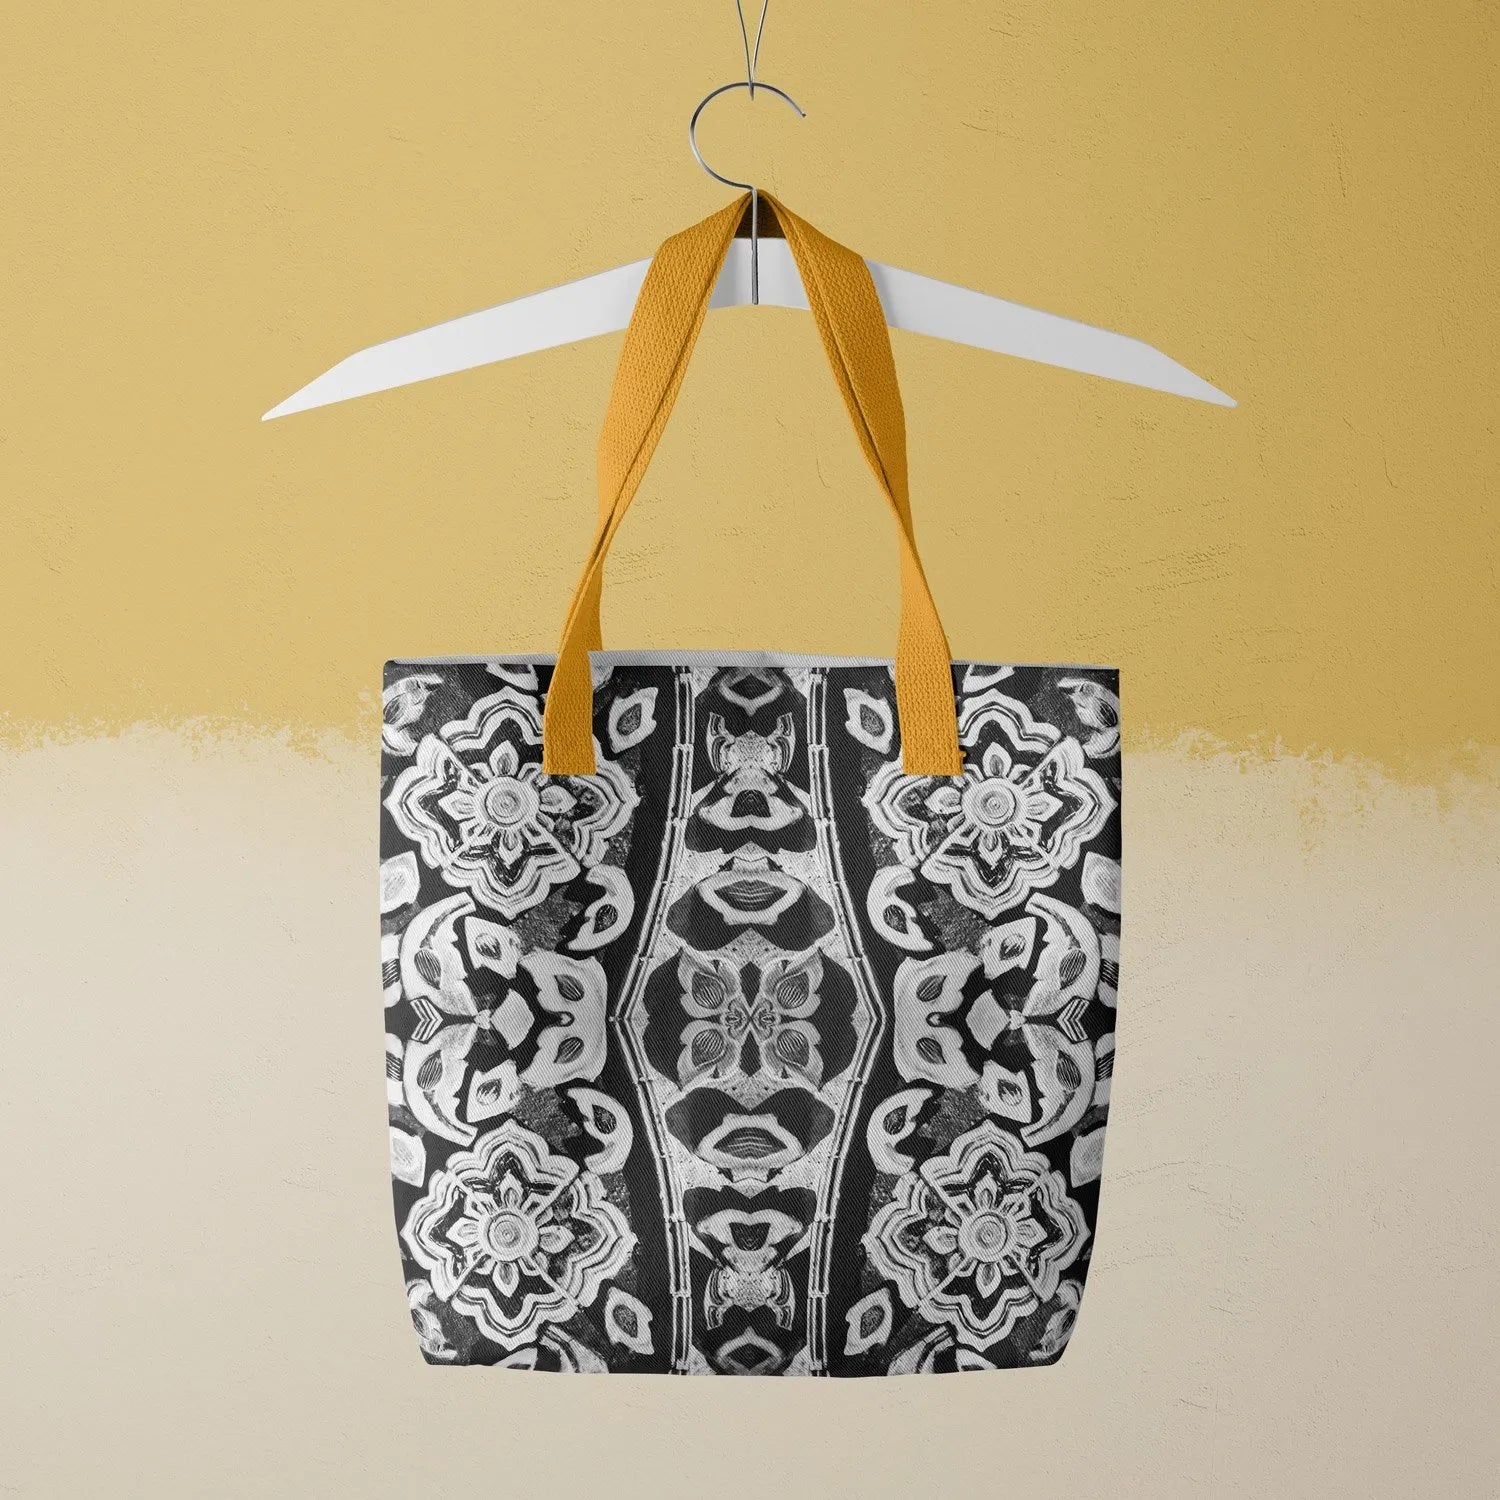 Masala Thai Tote - Black And White - Heavy Duty Reusable Grocery Bag - Yellow Handles - Shopping Totes - Aesthetic Art